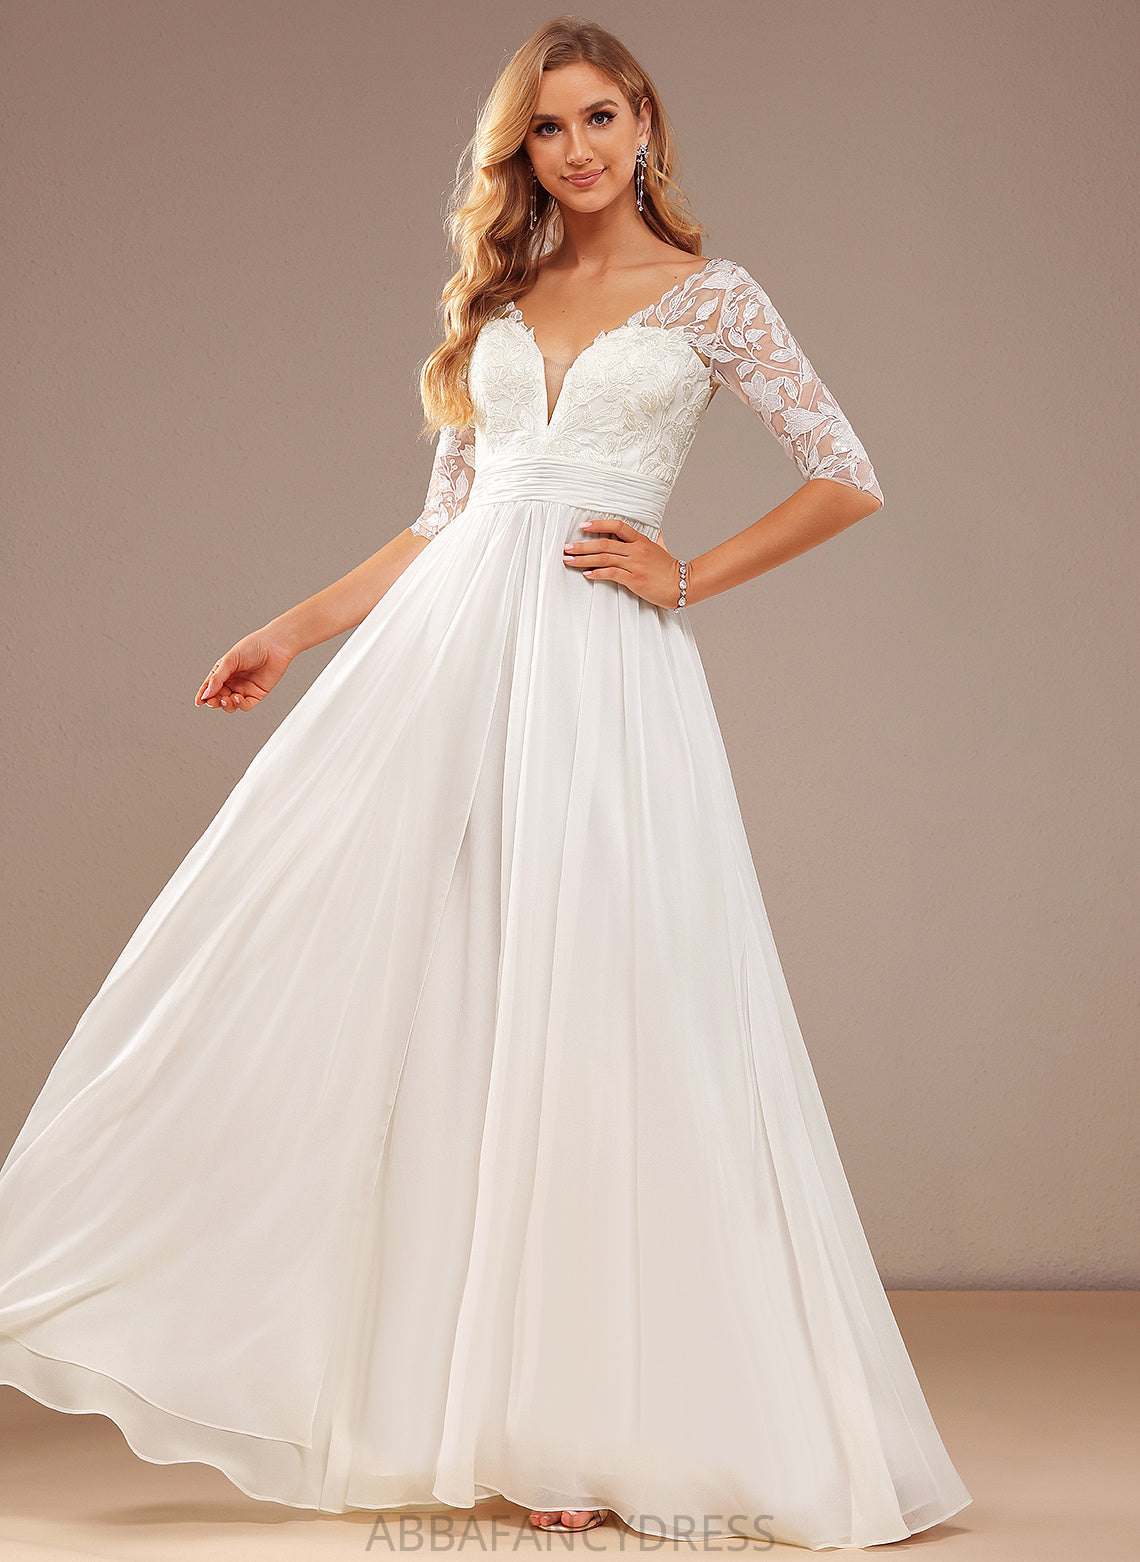 Sequins Lace Dress V-neck Wedding A-Line Chiffon With Ruffle Wedding Dresses Annie Floor-Length